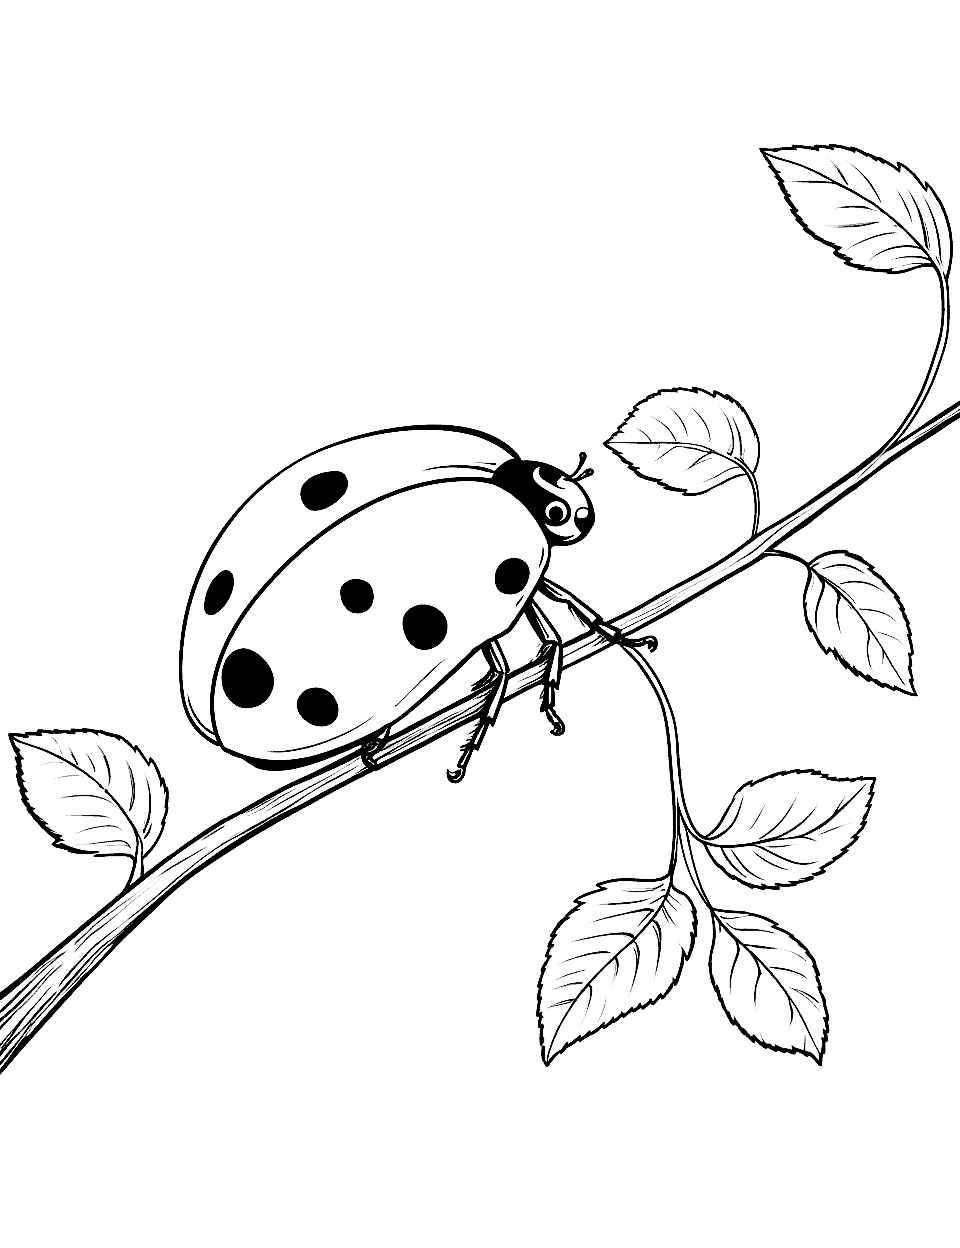 Ladybird Adventure on a Branch Coloring Page - A ladybird navigating a tree branch.